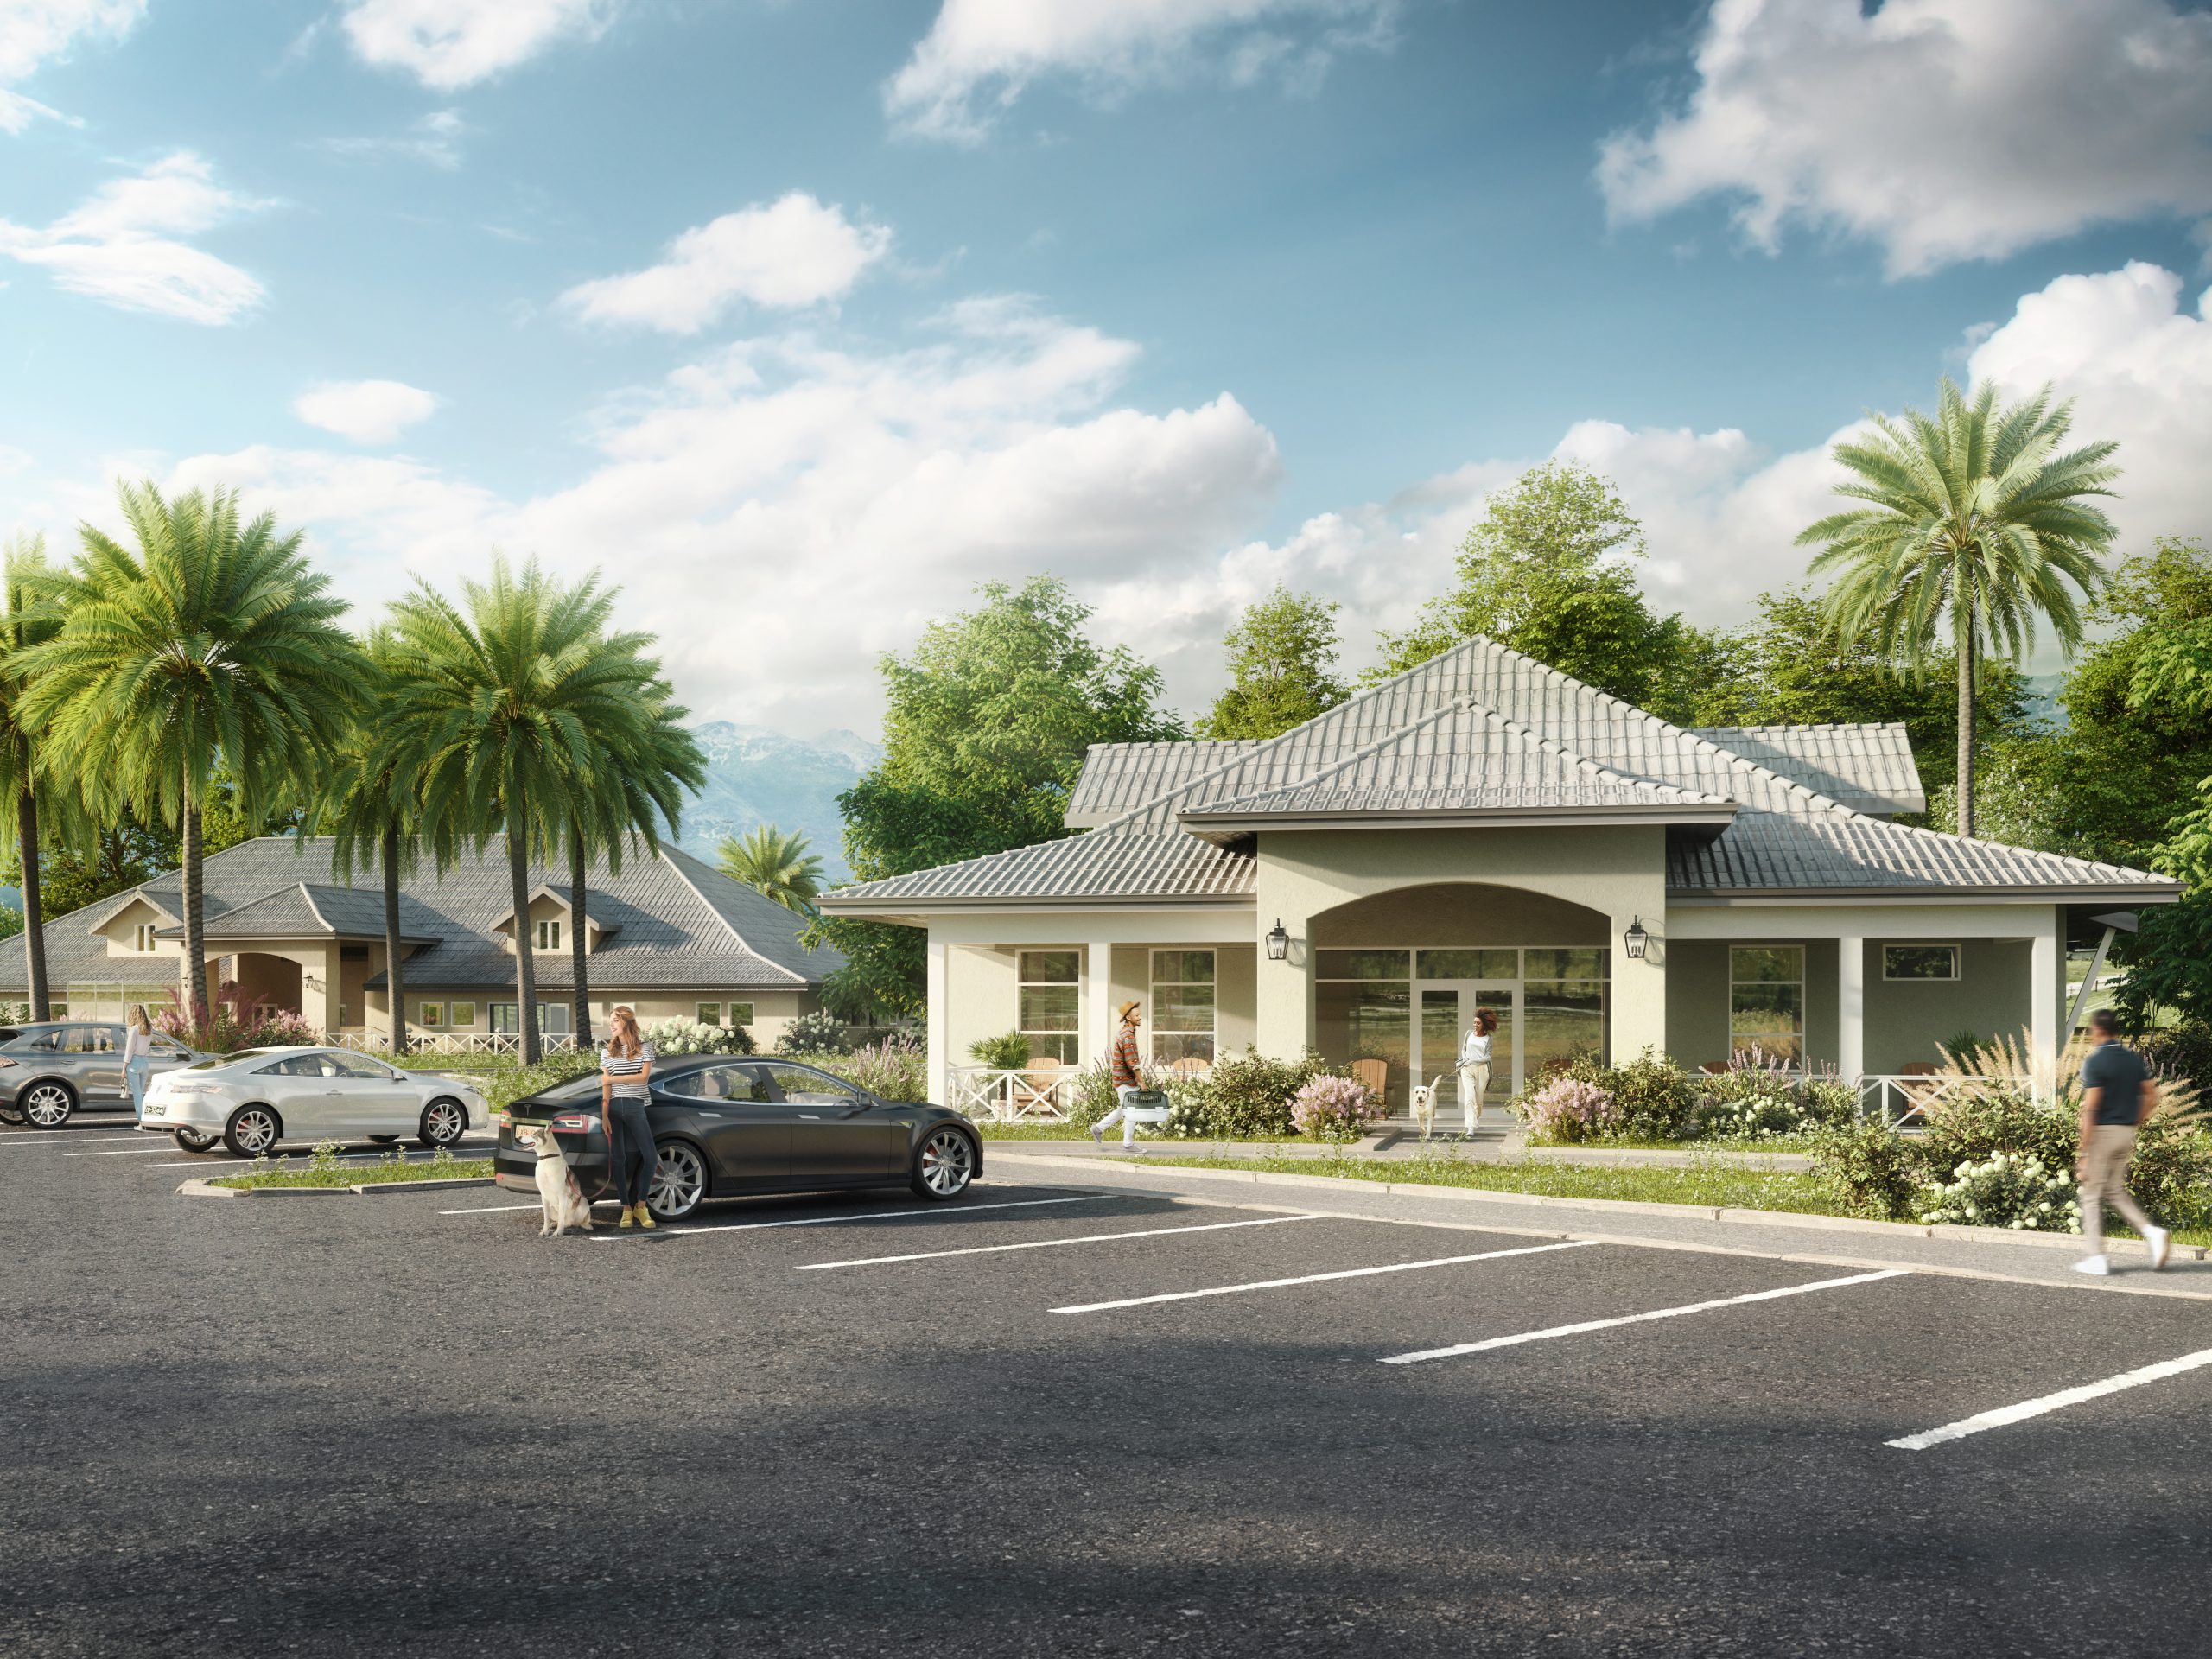 Exterior 3D Building Rendering of a Veterinary Institution in Hawaii